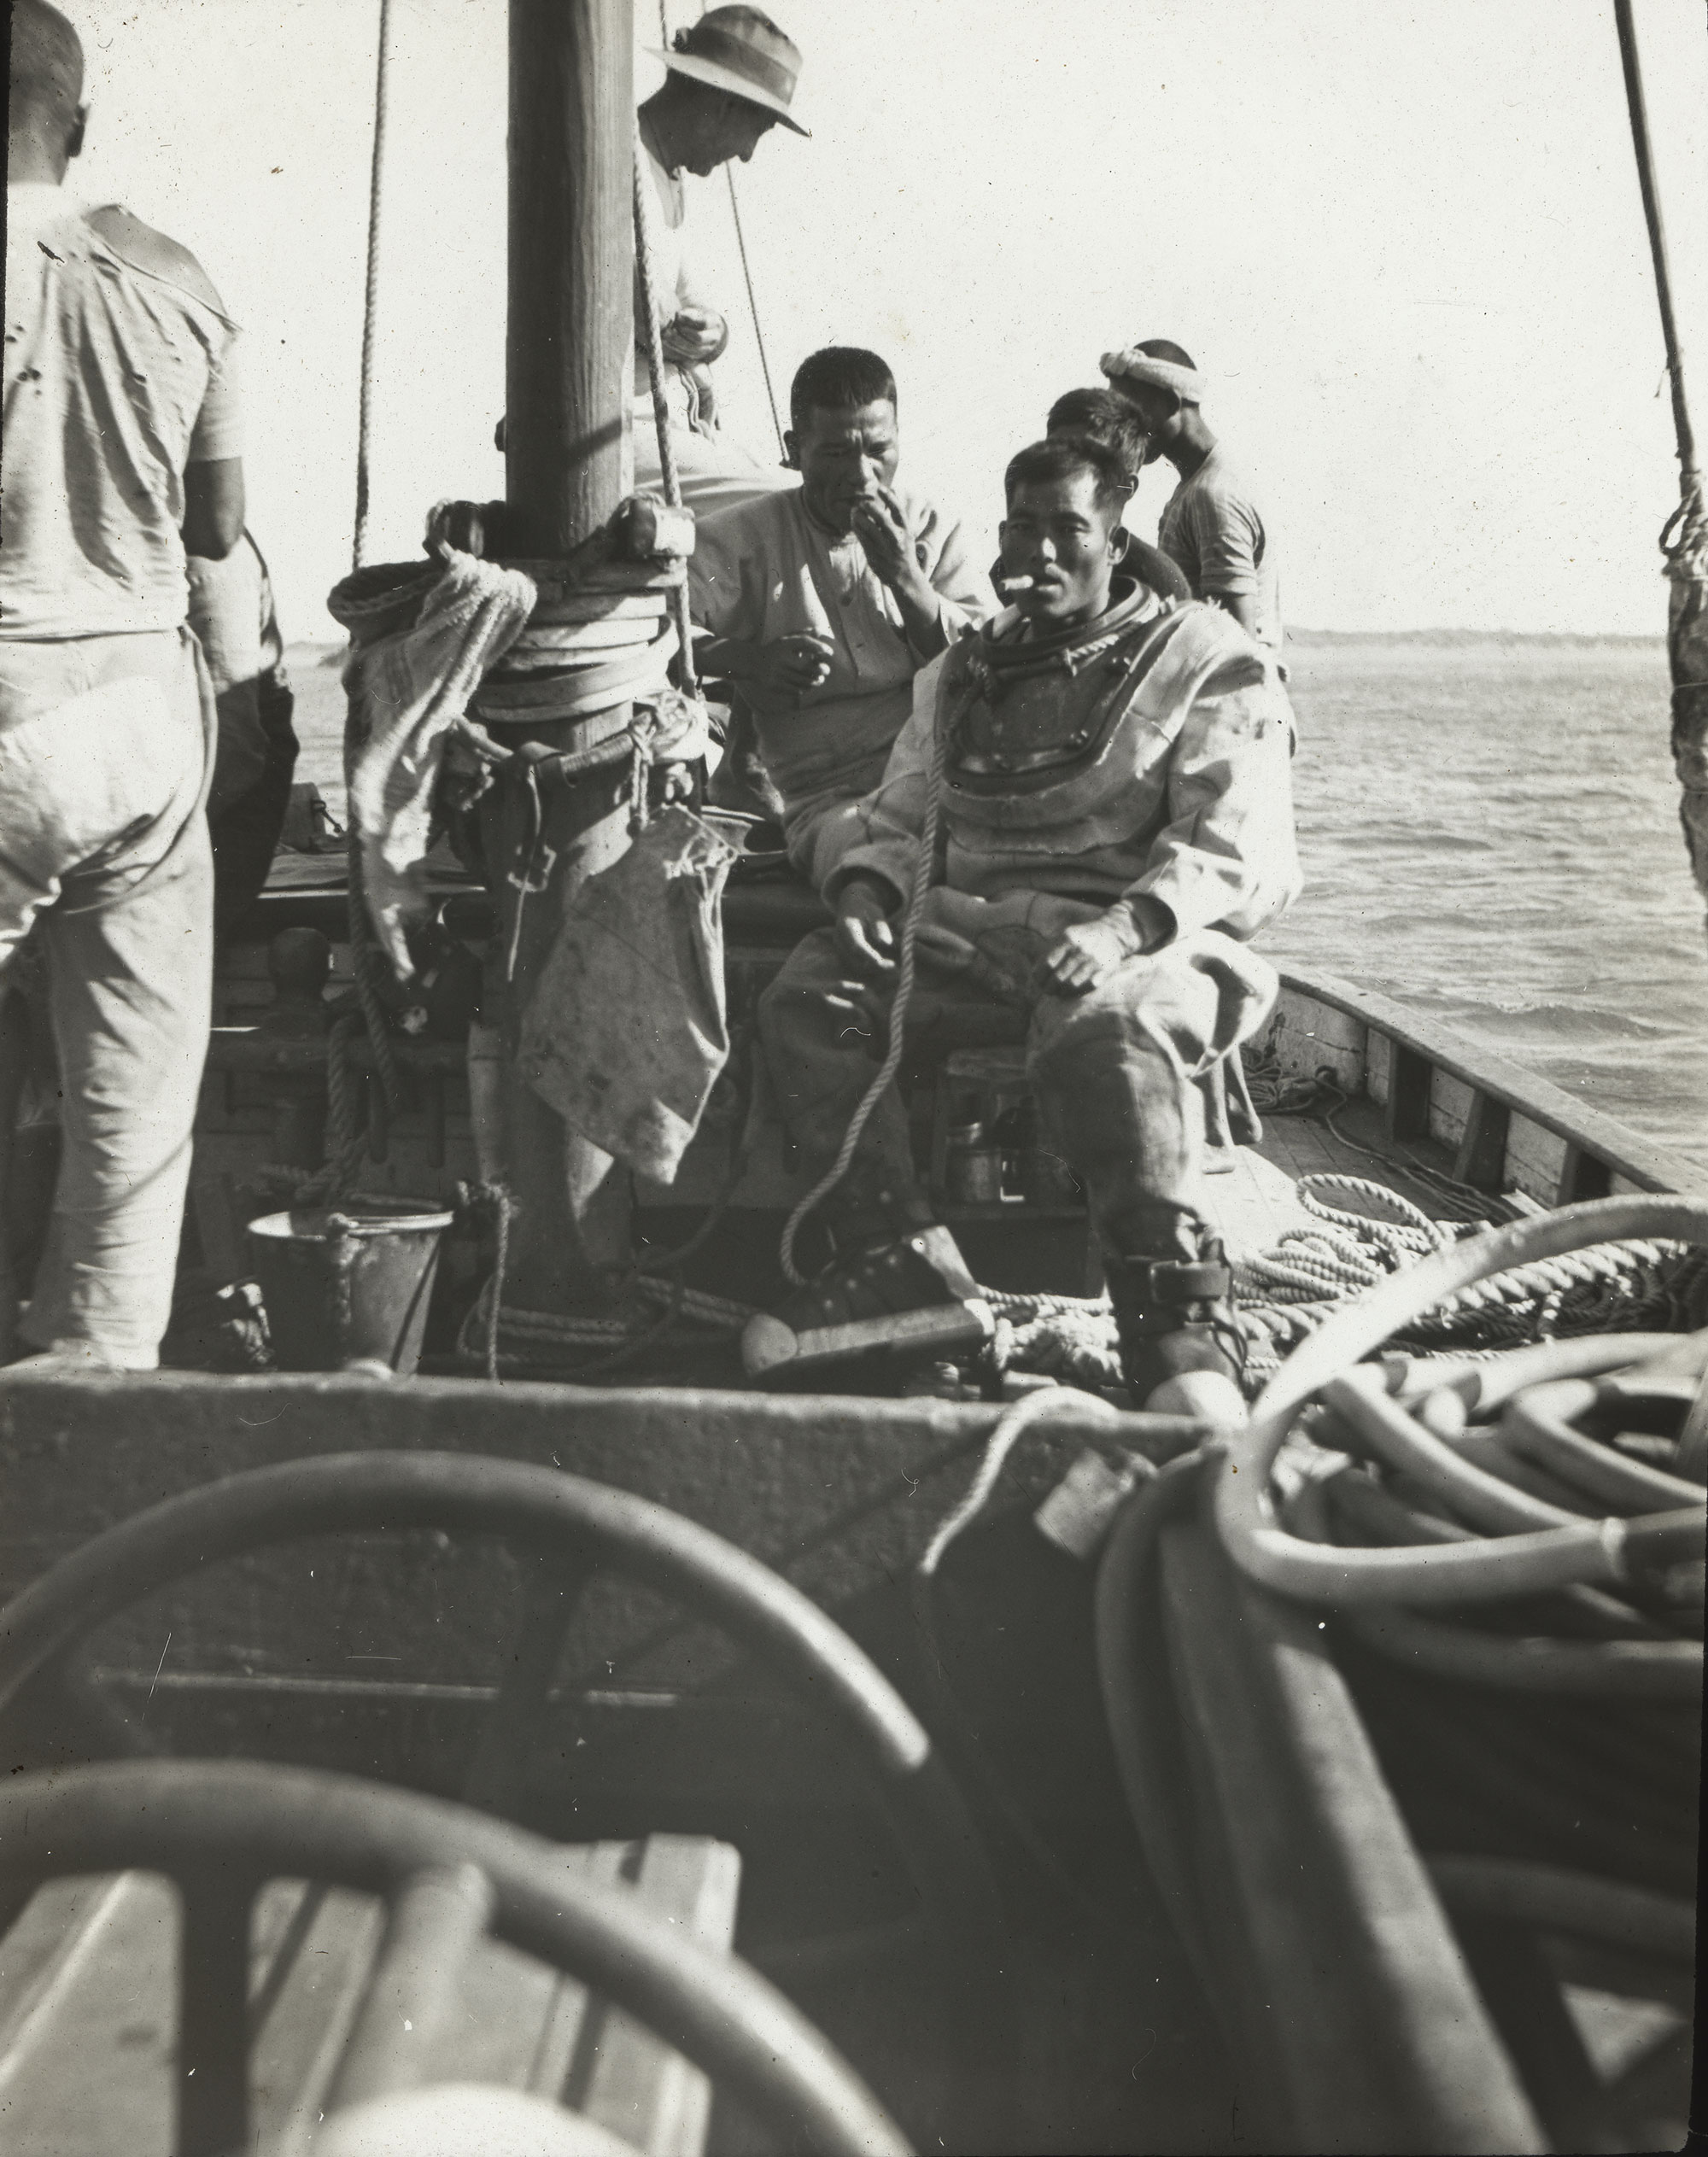 Japanese crew on a boat owned by Victor Kepert (in the hat), Broome. Photo taken in 1914 or in the early 1920s